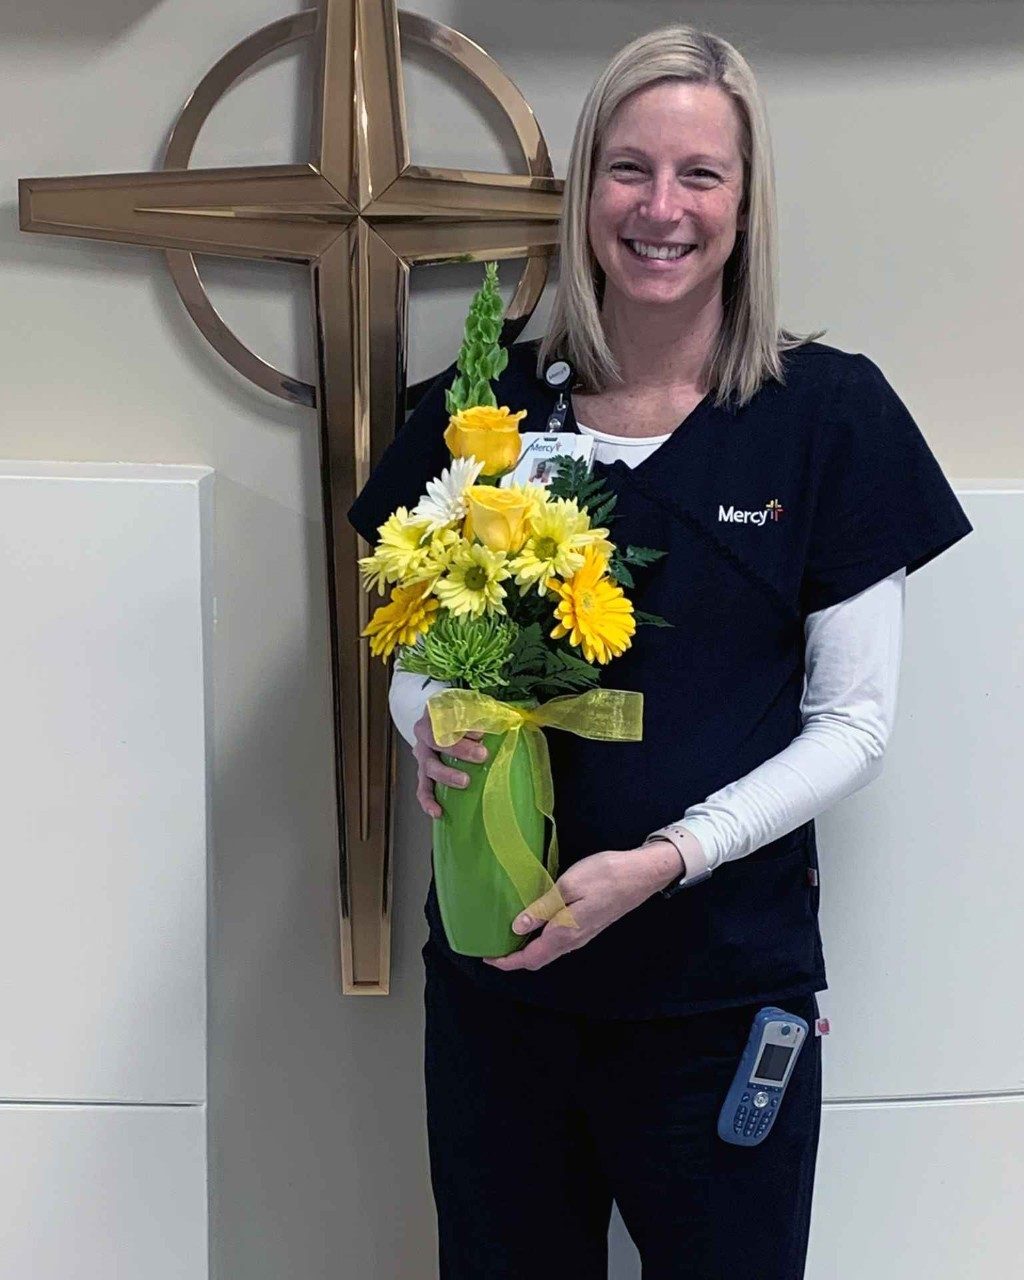 Jackie Siemer, RN, earned the DAISY Award for the extraordinary, compassionate and skillful nursing care she provides at Mercy Hospital South.